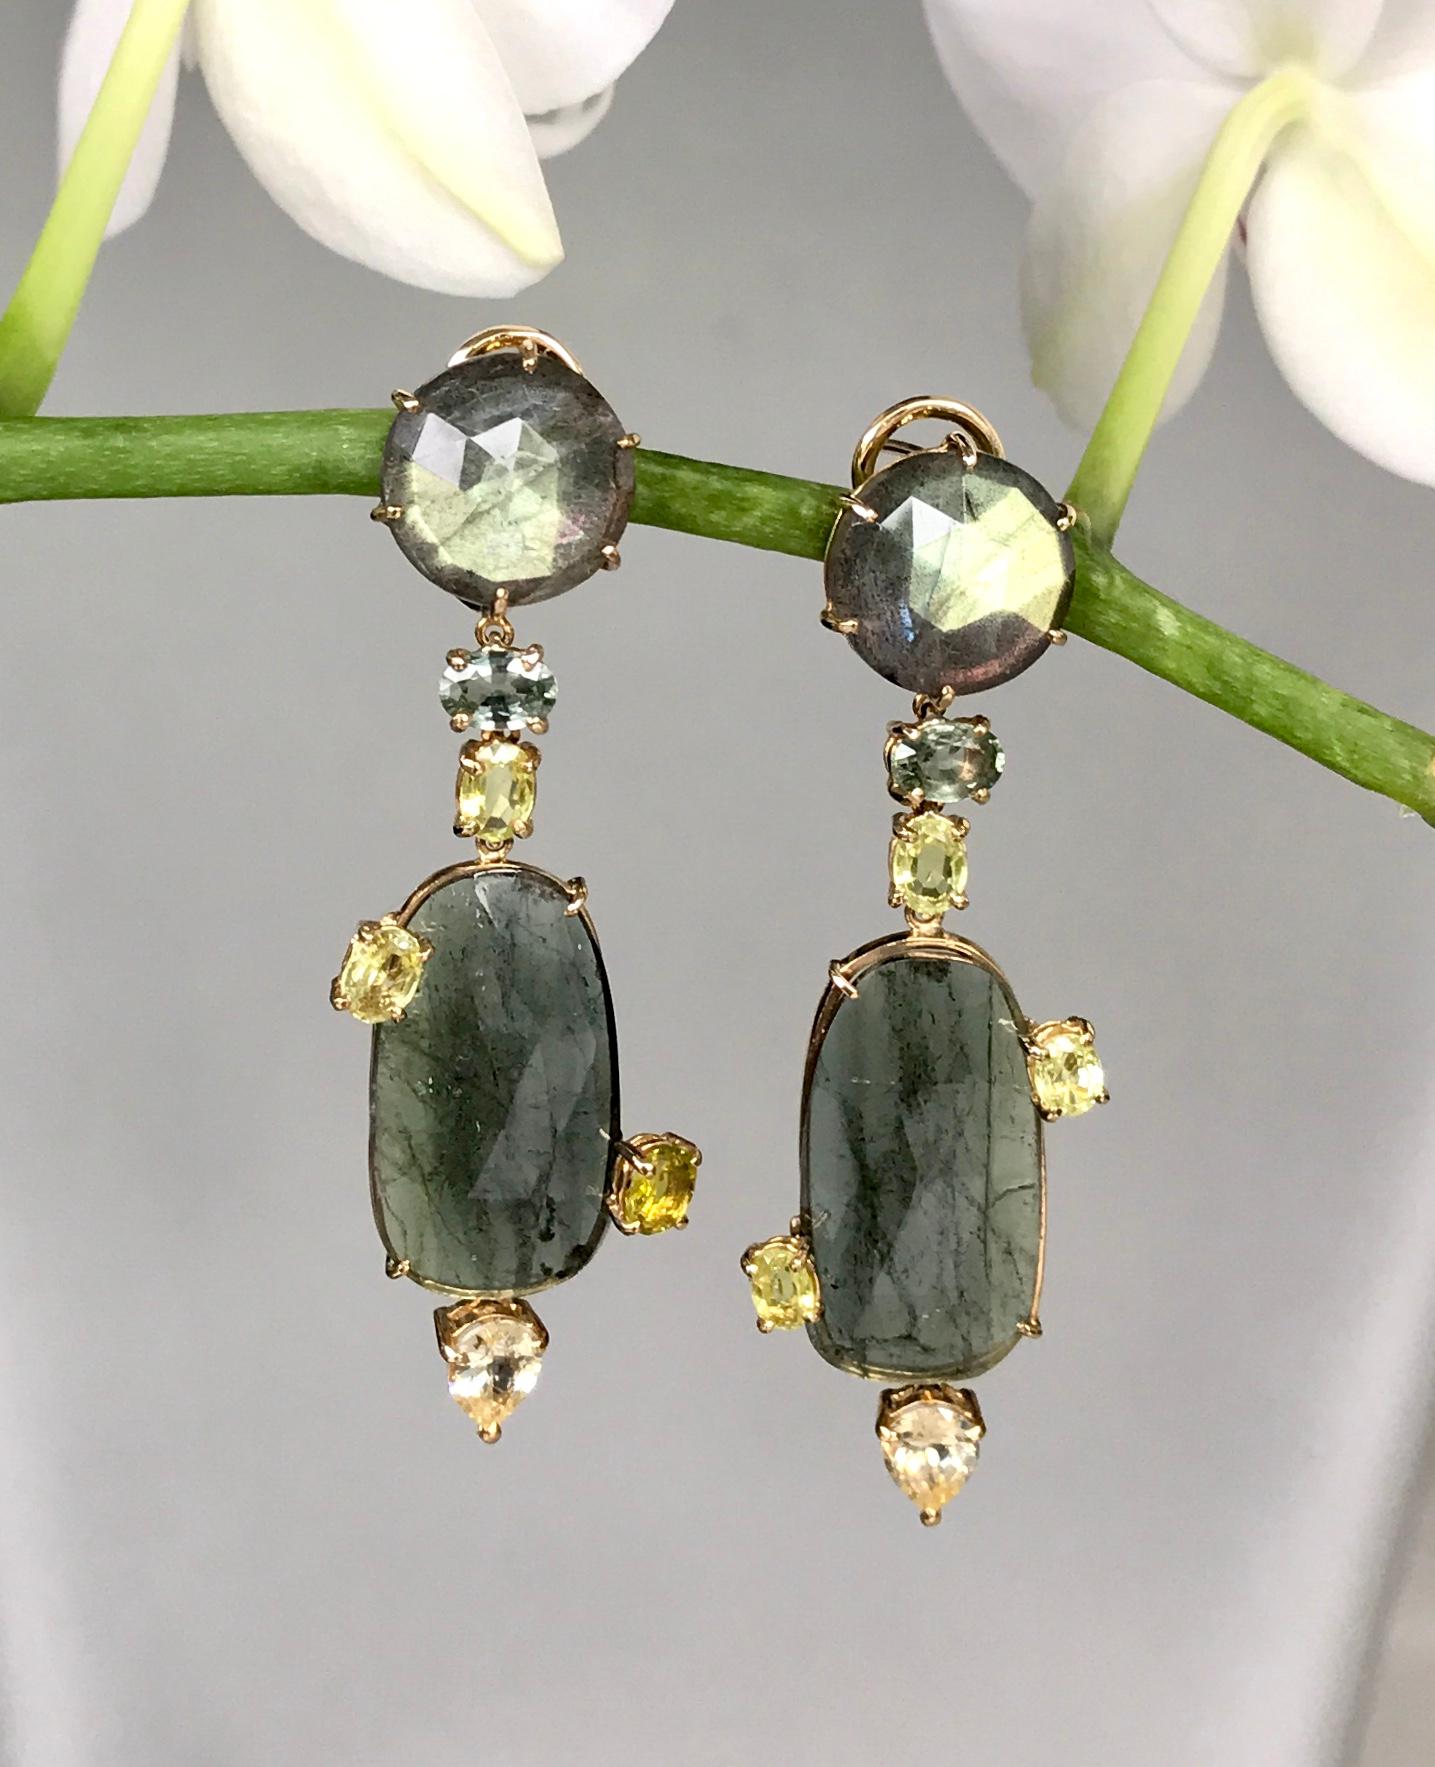 Labradorites, green tourmaline slices, sapphires and chrysoberyl dangle earrings, handcrafted in 18 karat yellow gold.

These one-of-a-kind earrings are whimsical, fun and interesting, created with multi gemstones of labradorites, fancy rose cut